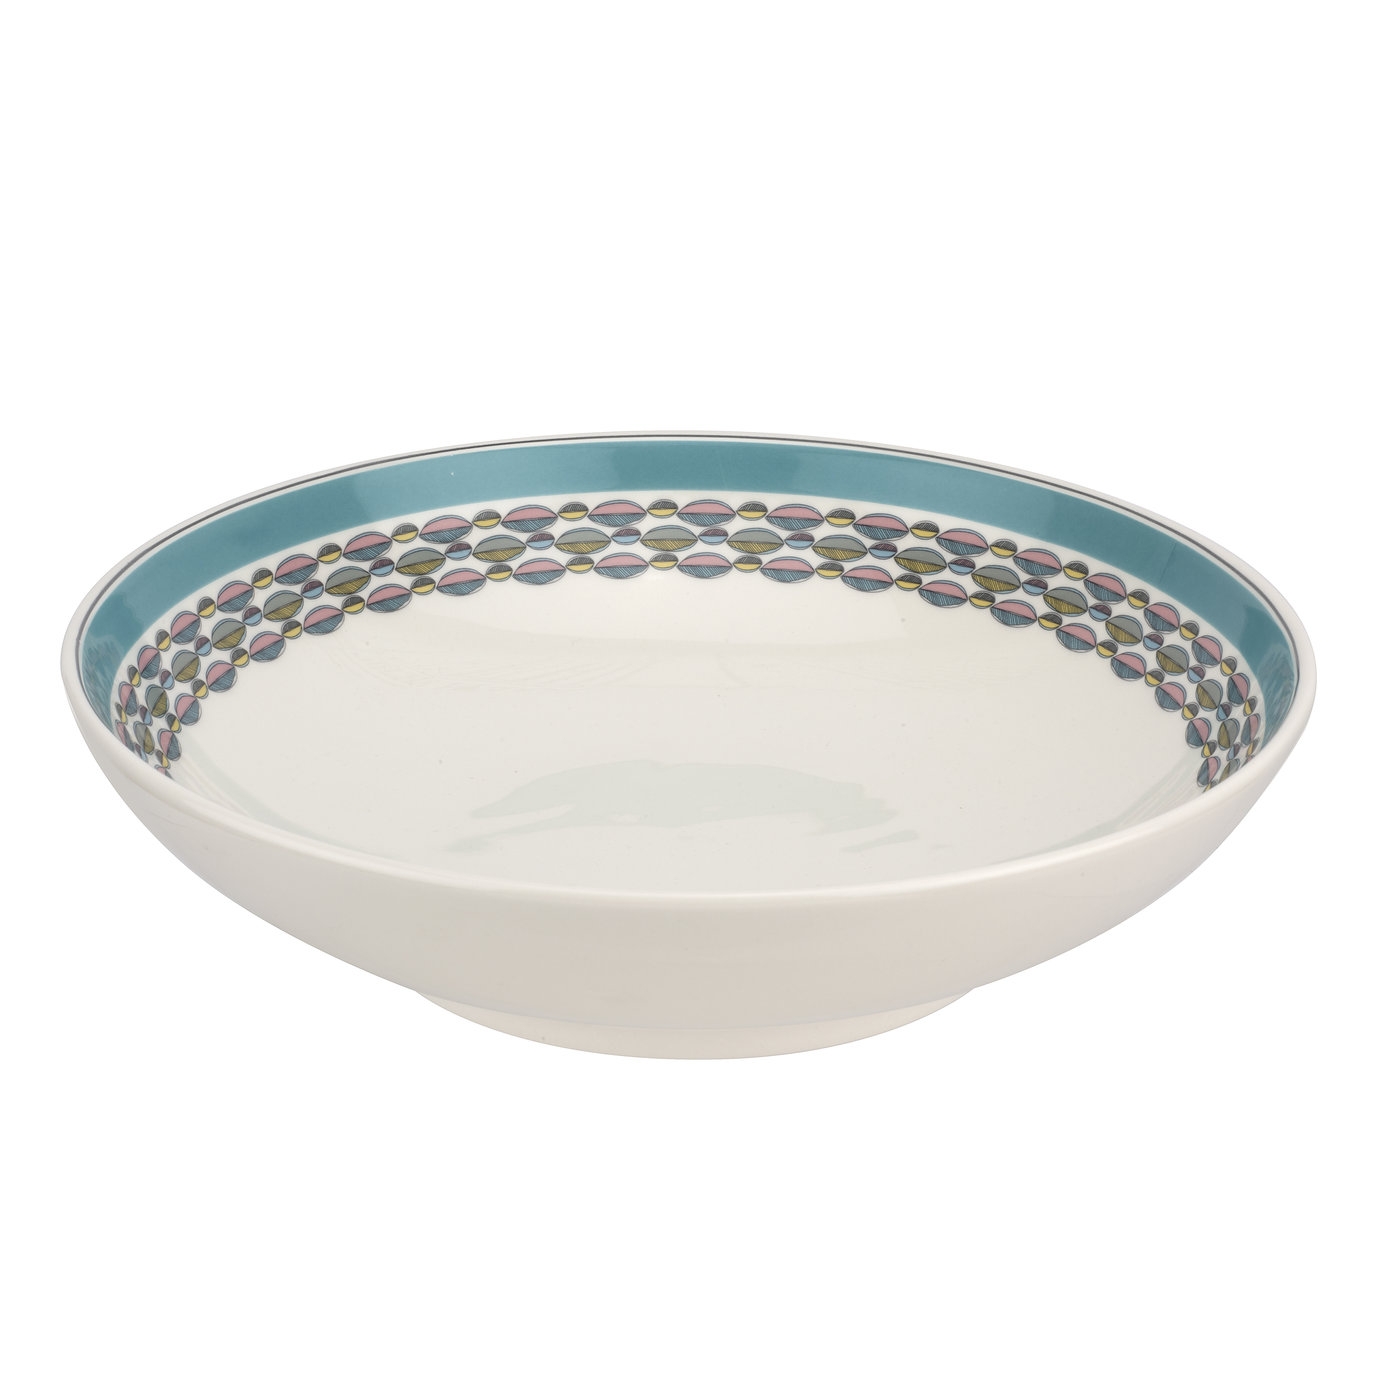 Westerly Turquoise 12.75 Inch Low Bowl image number null